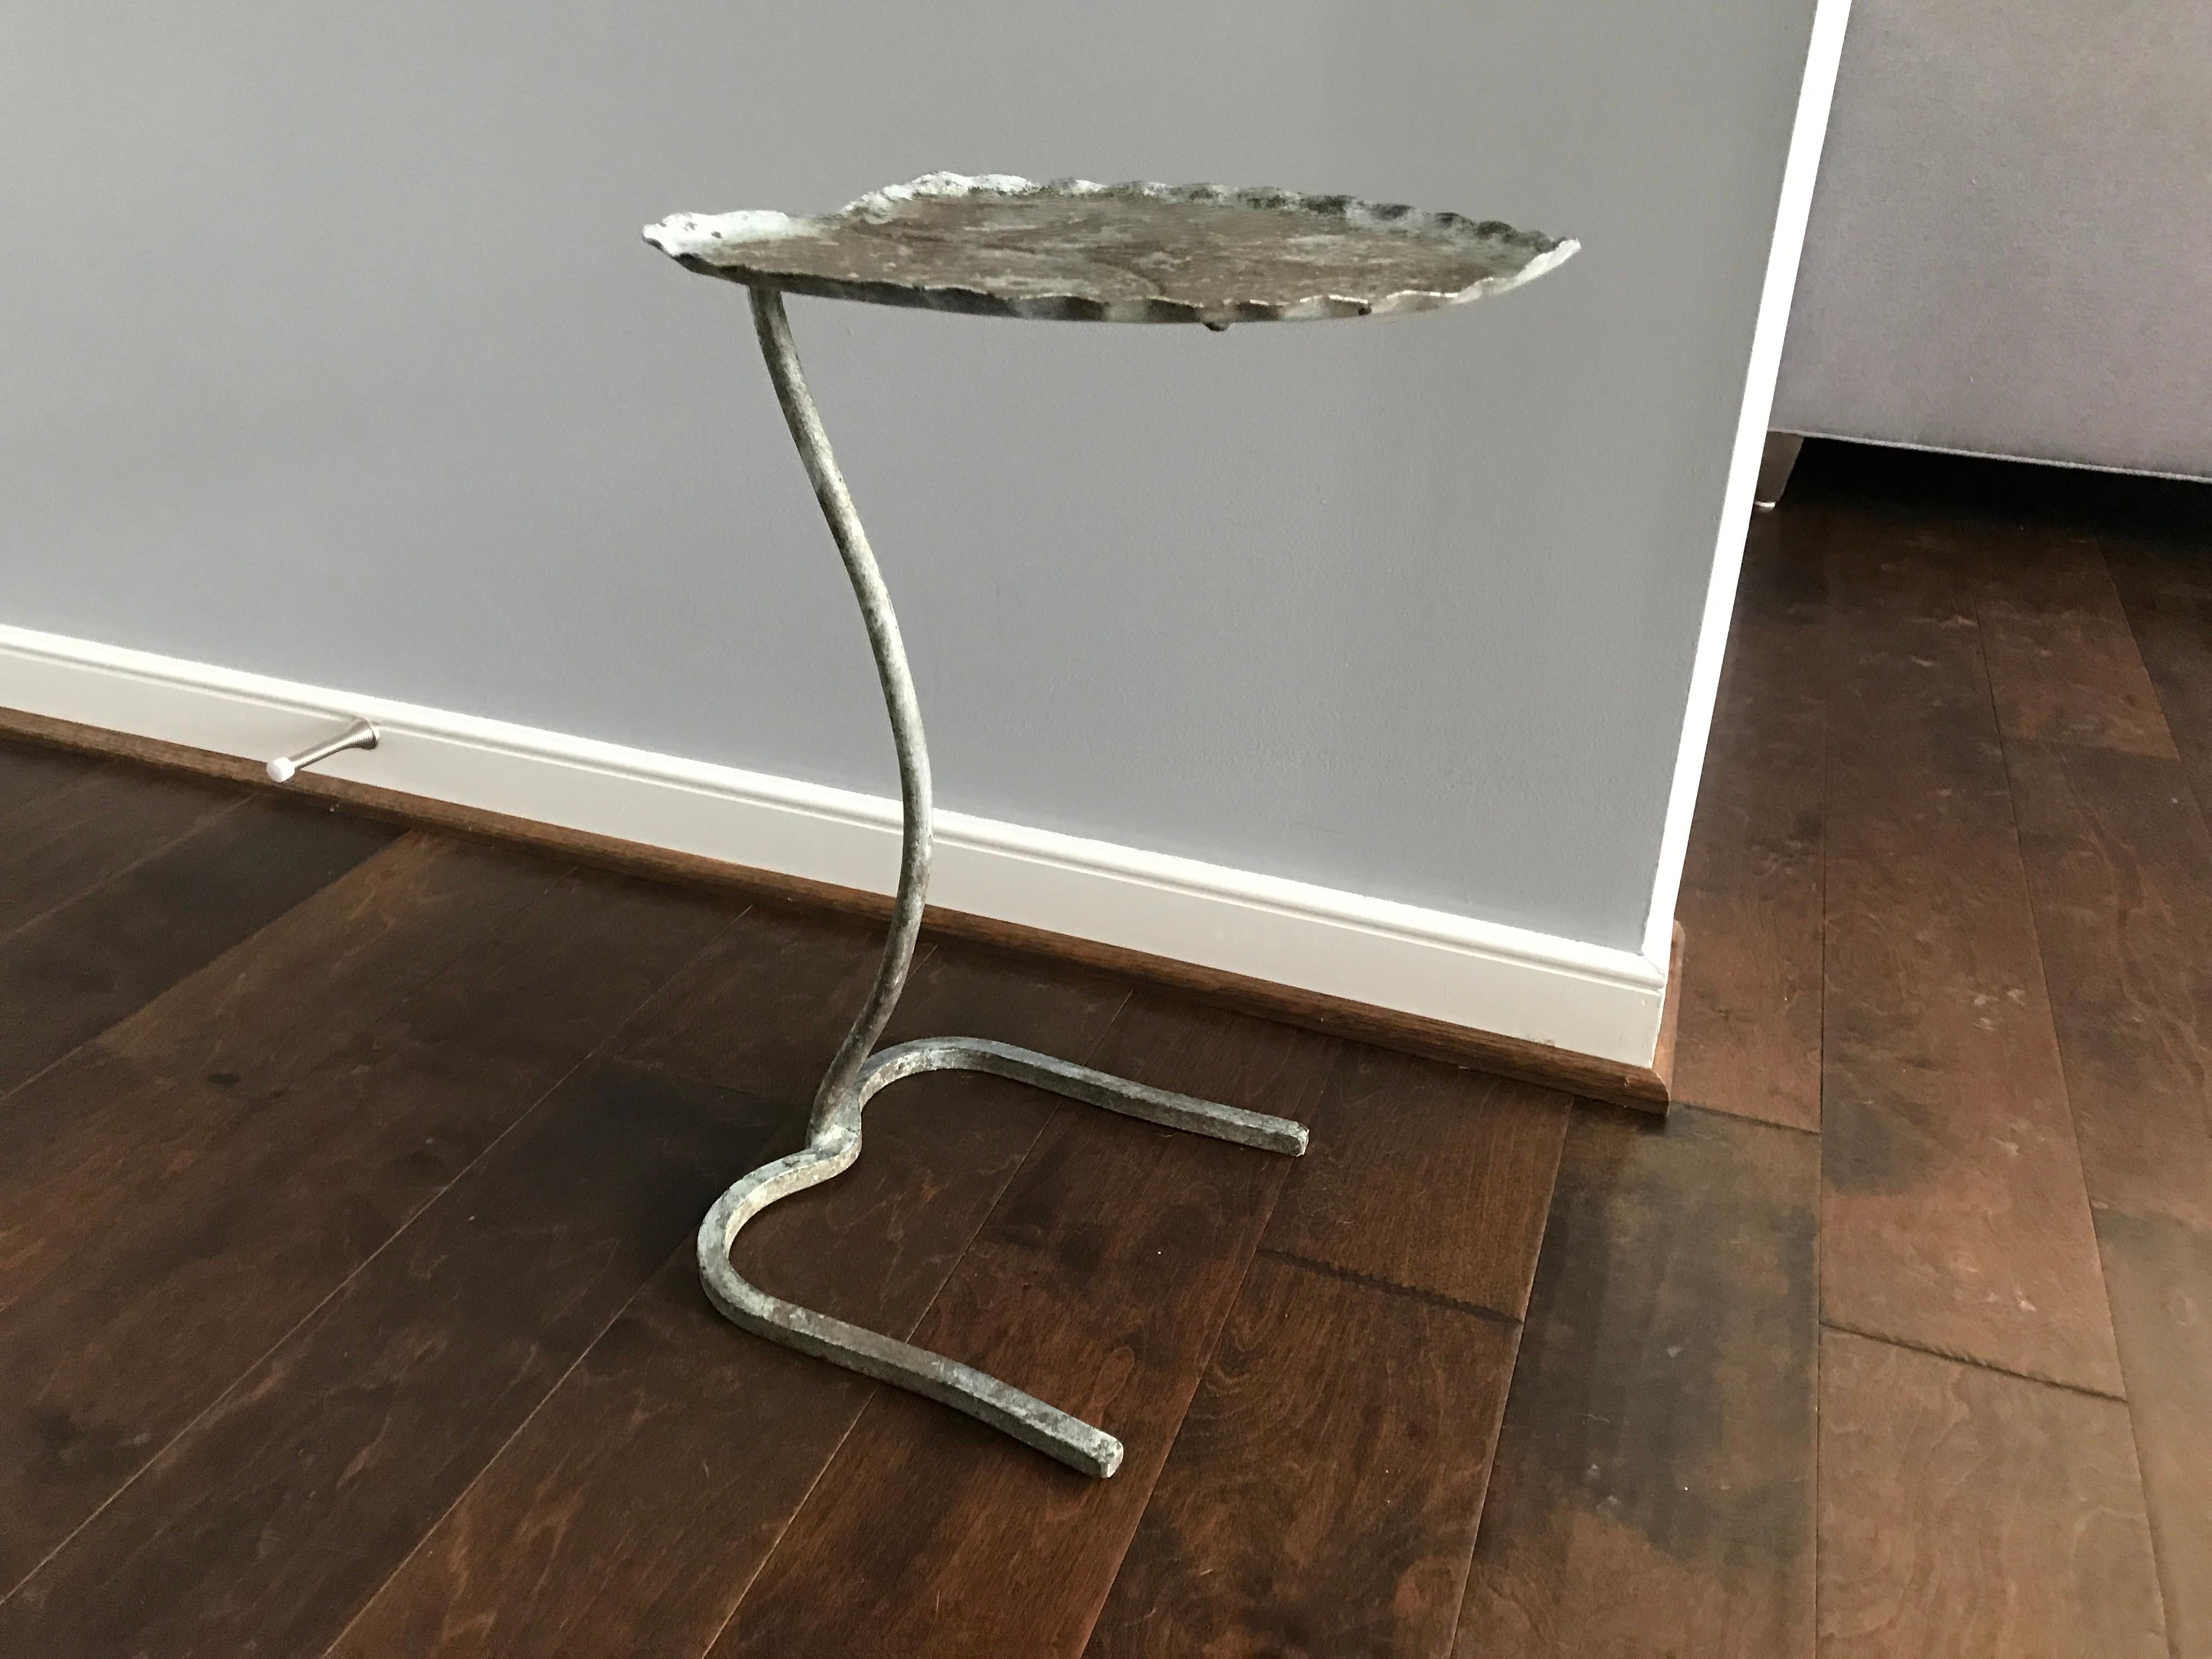 Listed is a stunning, 1950s lily pad sculptural iron side table by John Salterini. The piece has a stunning, all-over verde gris finish that's original to the piece. It looks as if it's never been used and has never been used outdoors.

